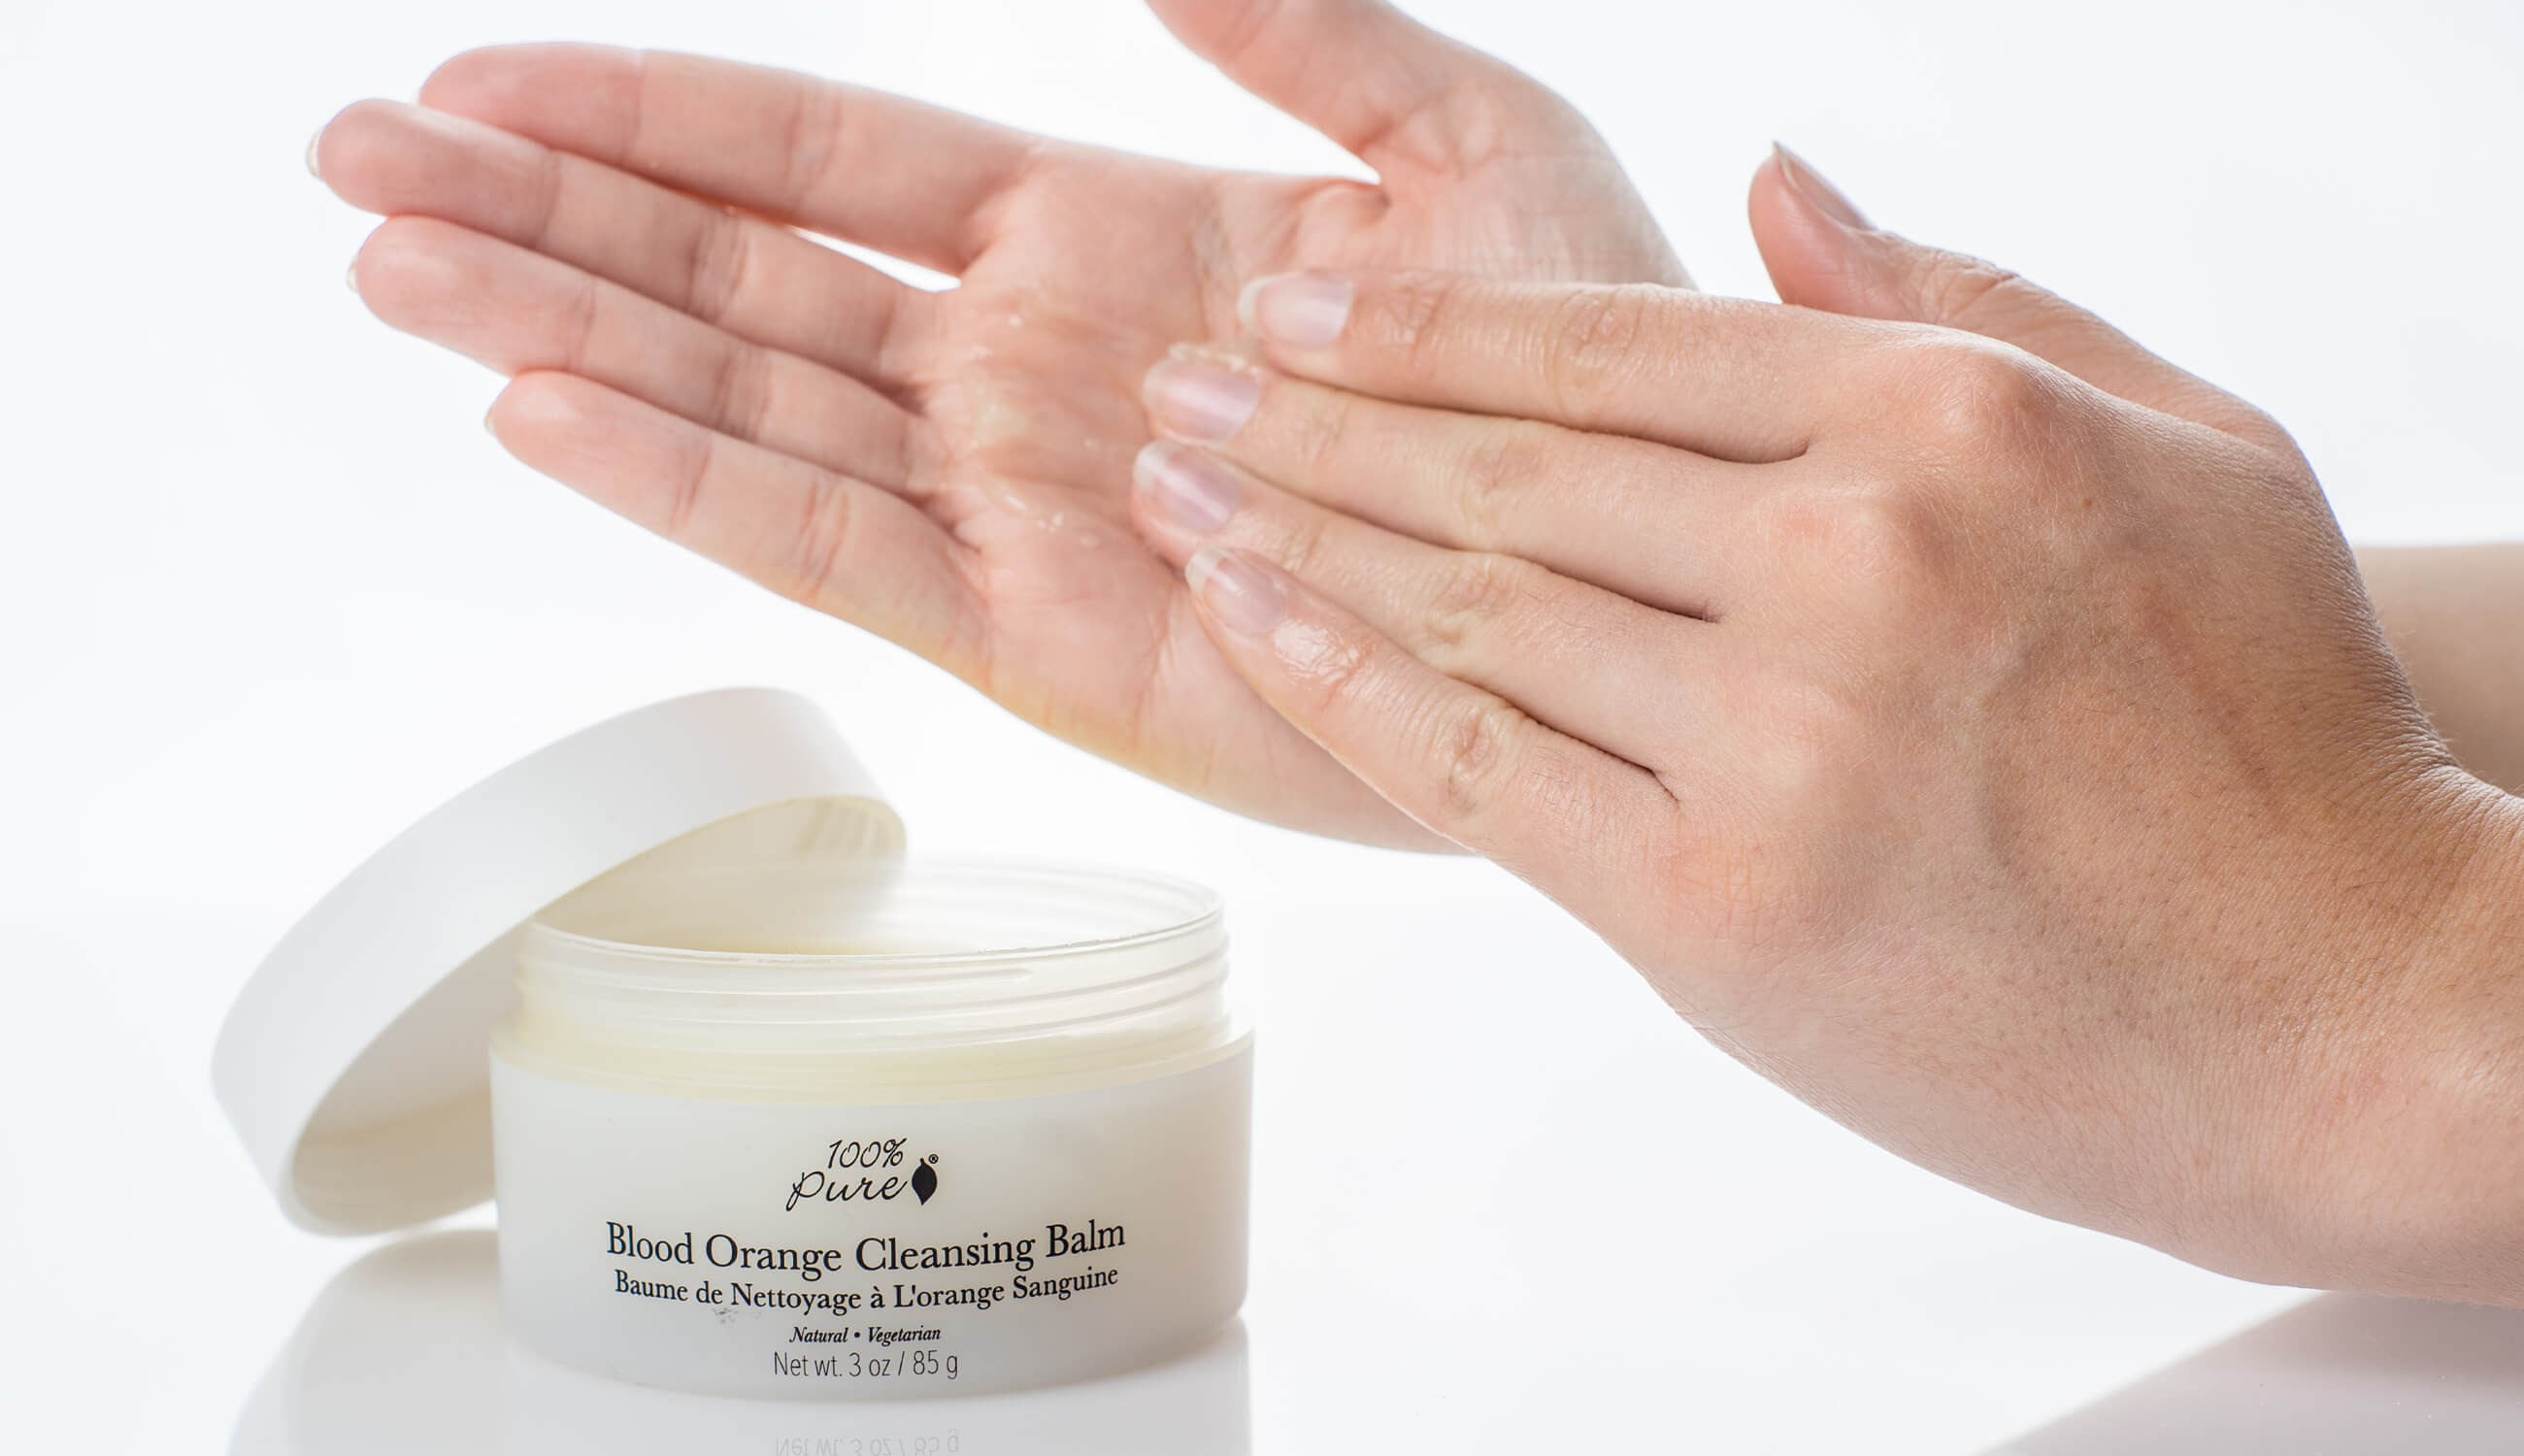 Cleansing balm hands